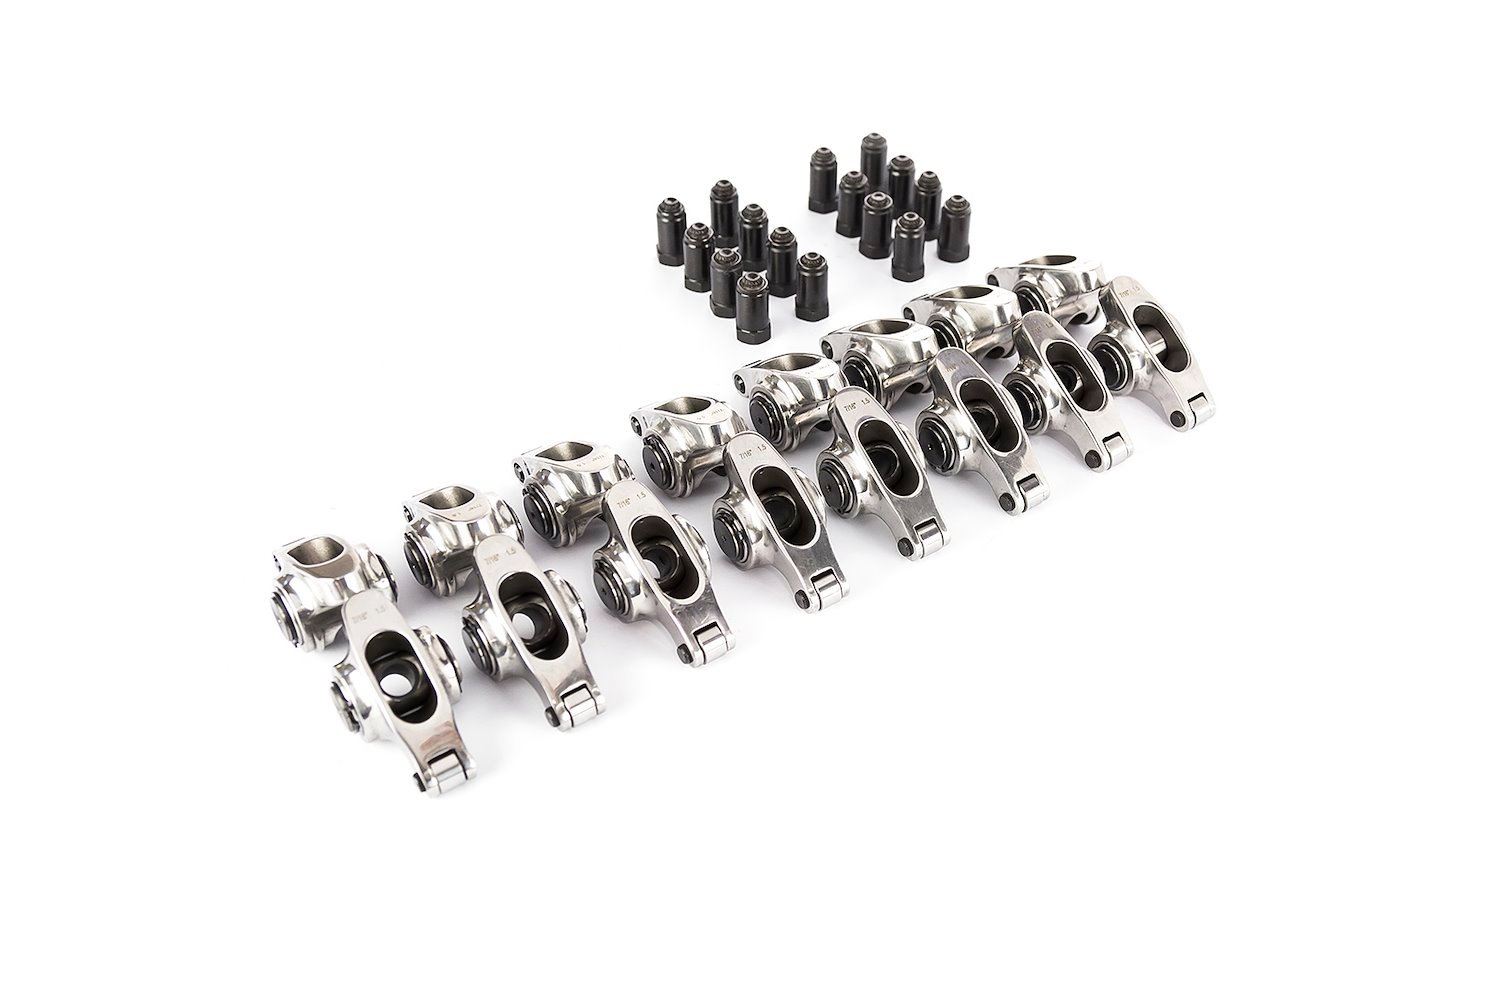 PCE261.1258 Pontiac 265 350 400 455 1.65 Ratio 7/16 in. Stainless Steel Roller Rocker Arms